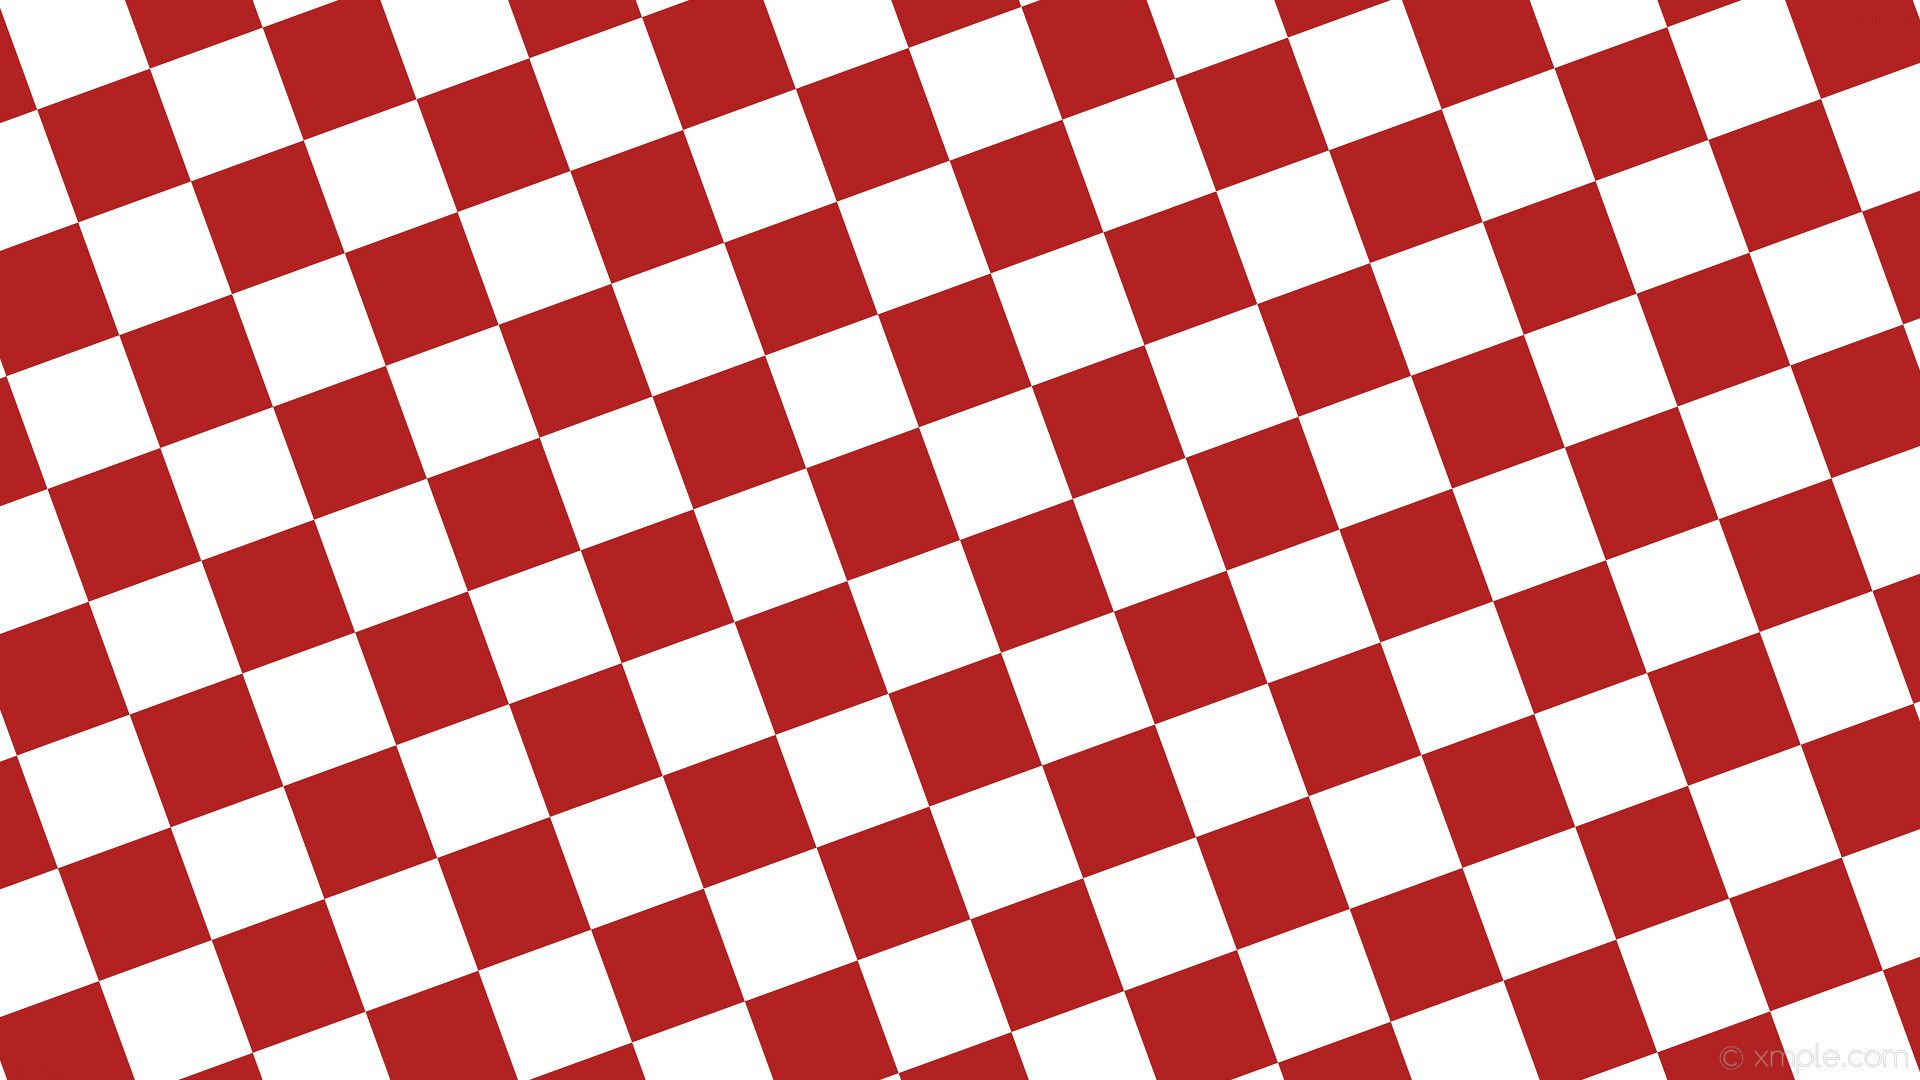 1920x1080 Red and White Checkered Wallpapers Top Free Red and White Checkered Backgrounds